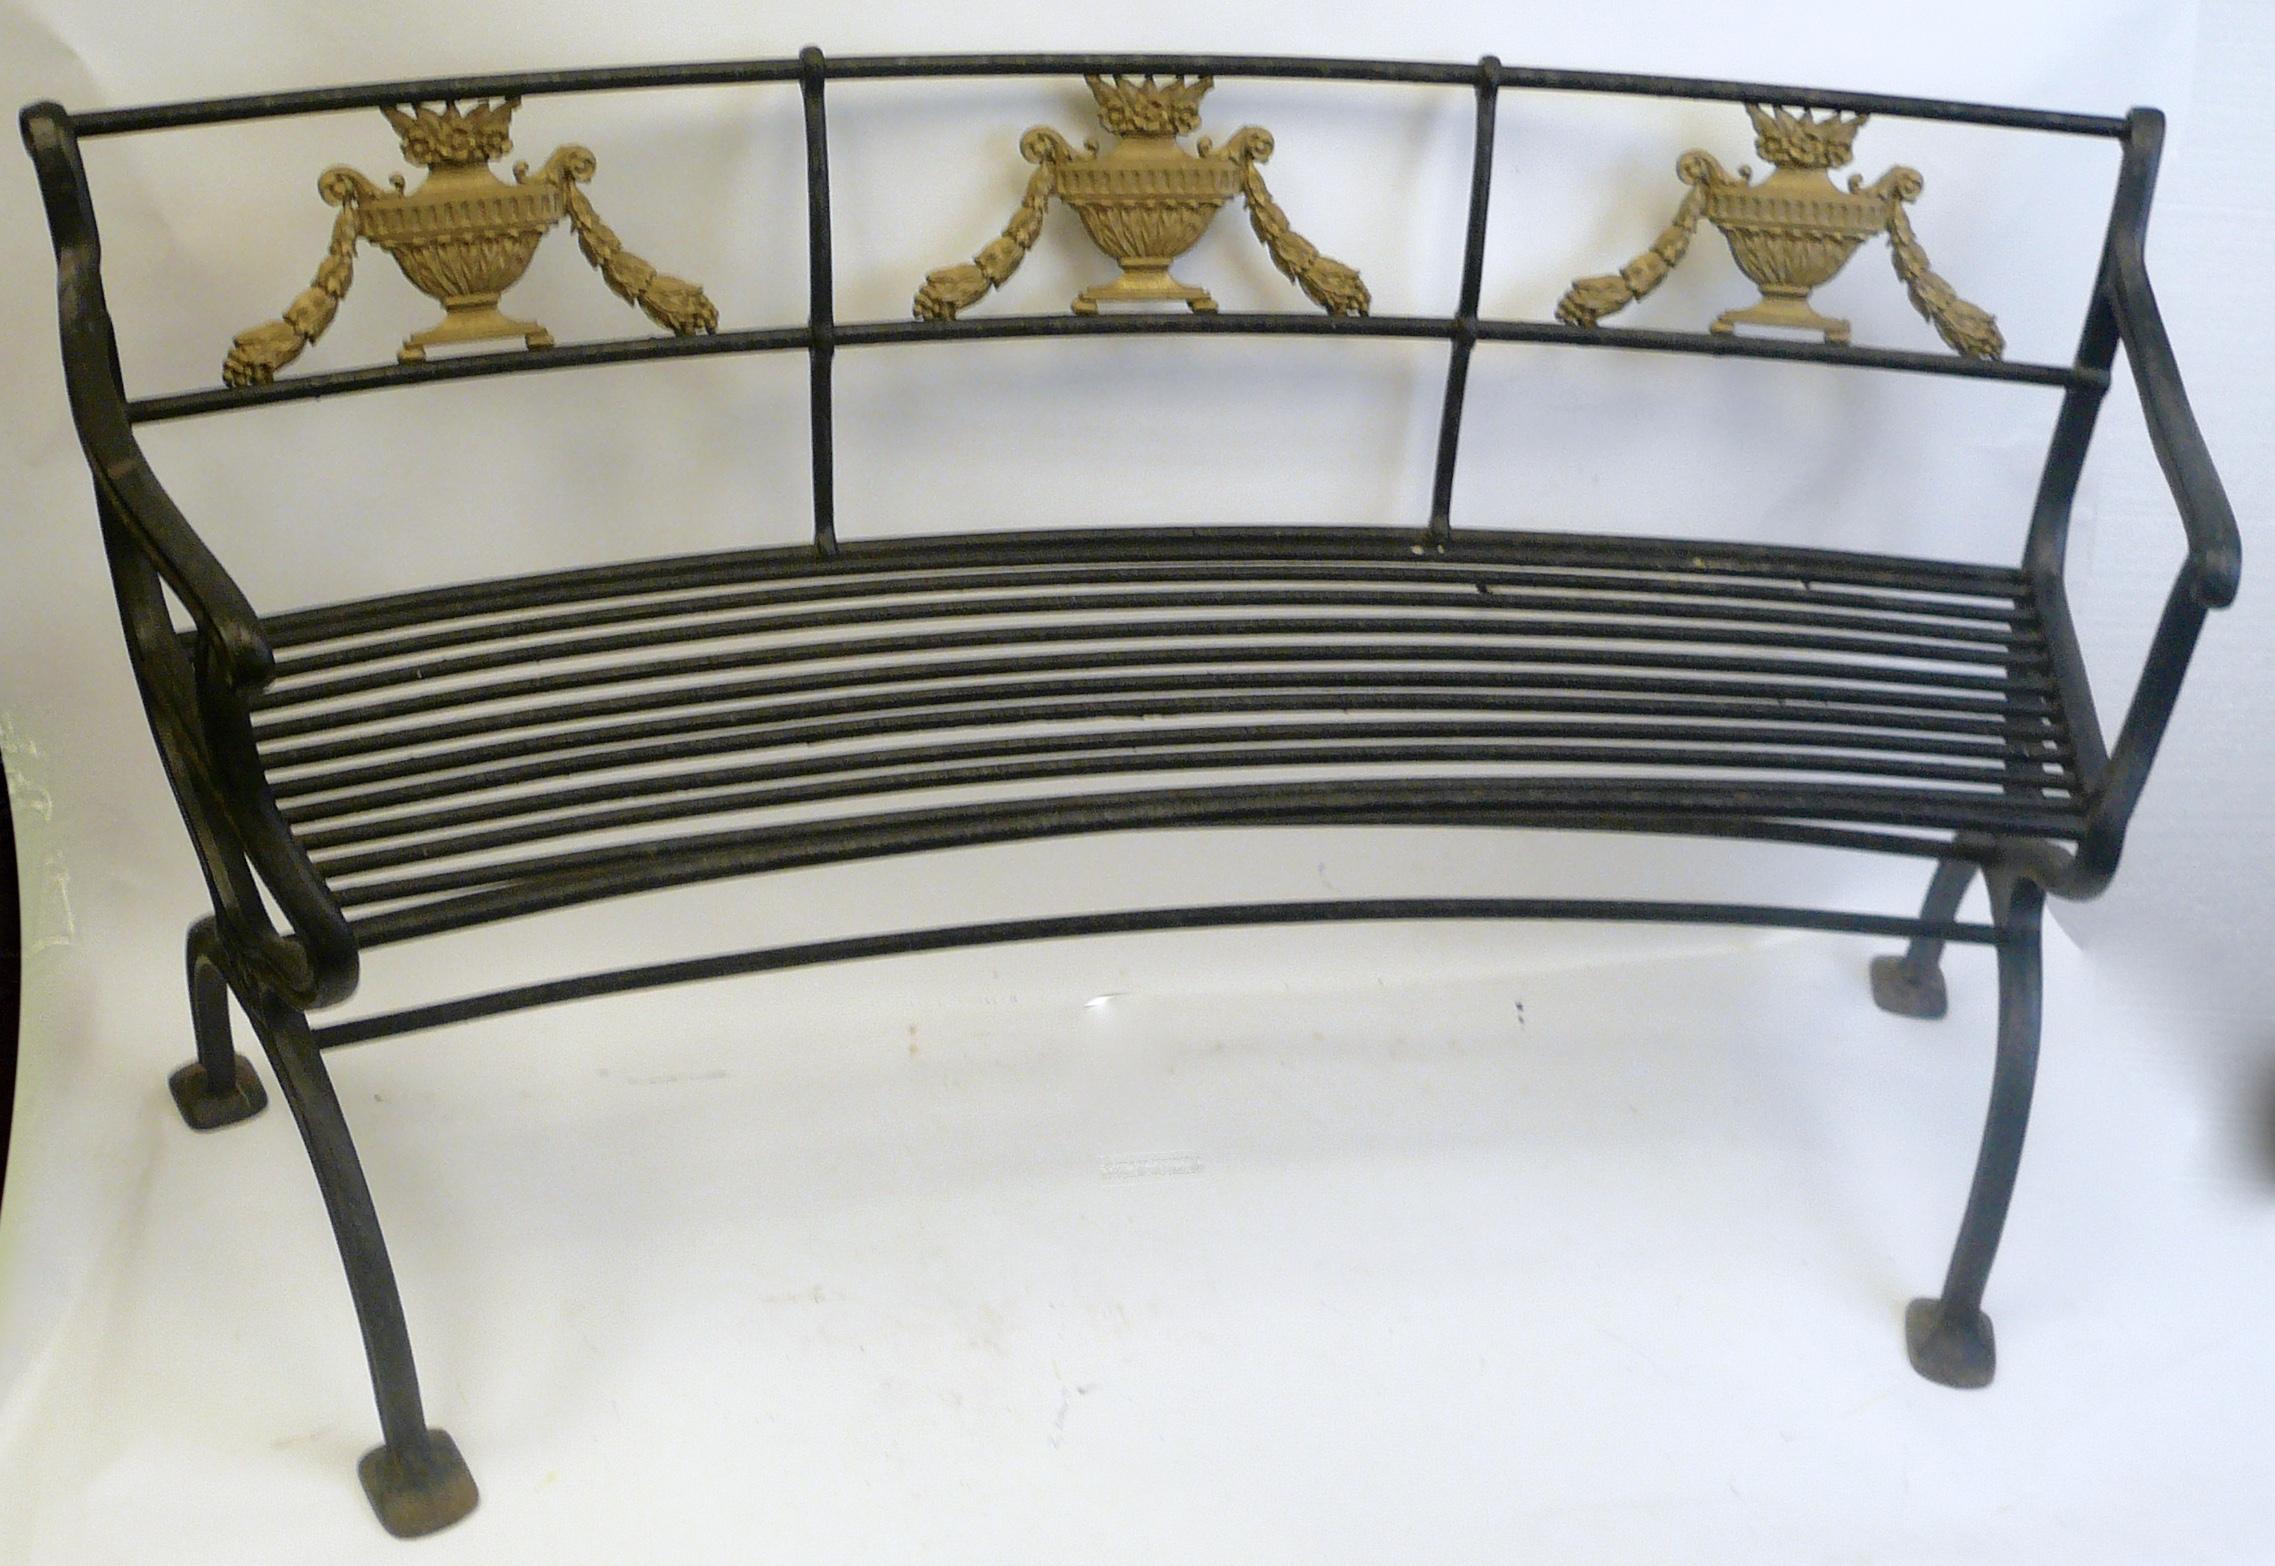 Pair of Classical Style Cast Iron Garden Benches by W. A. Snow, Boston 1